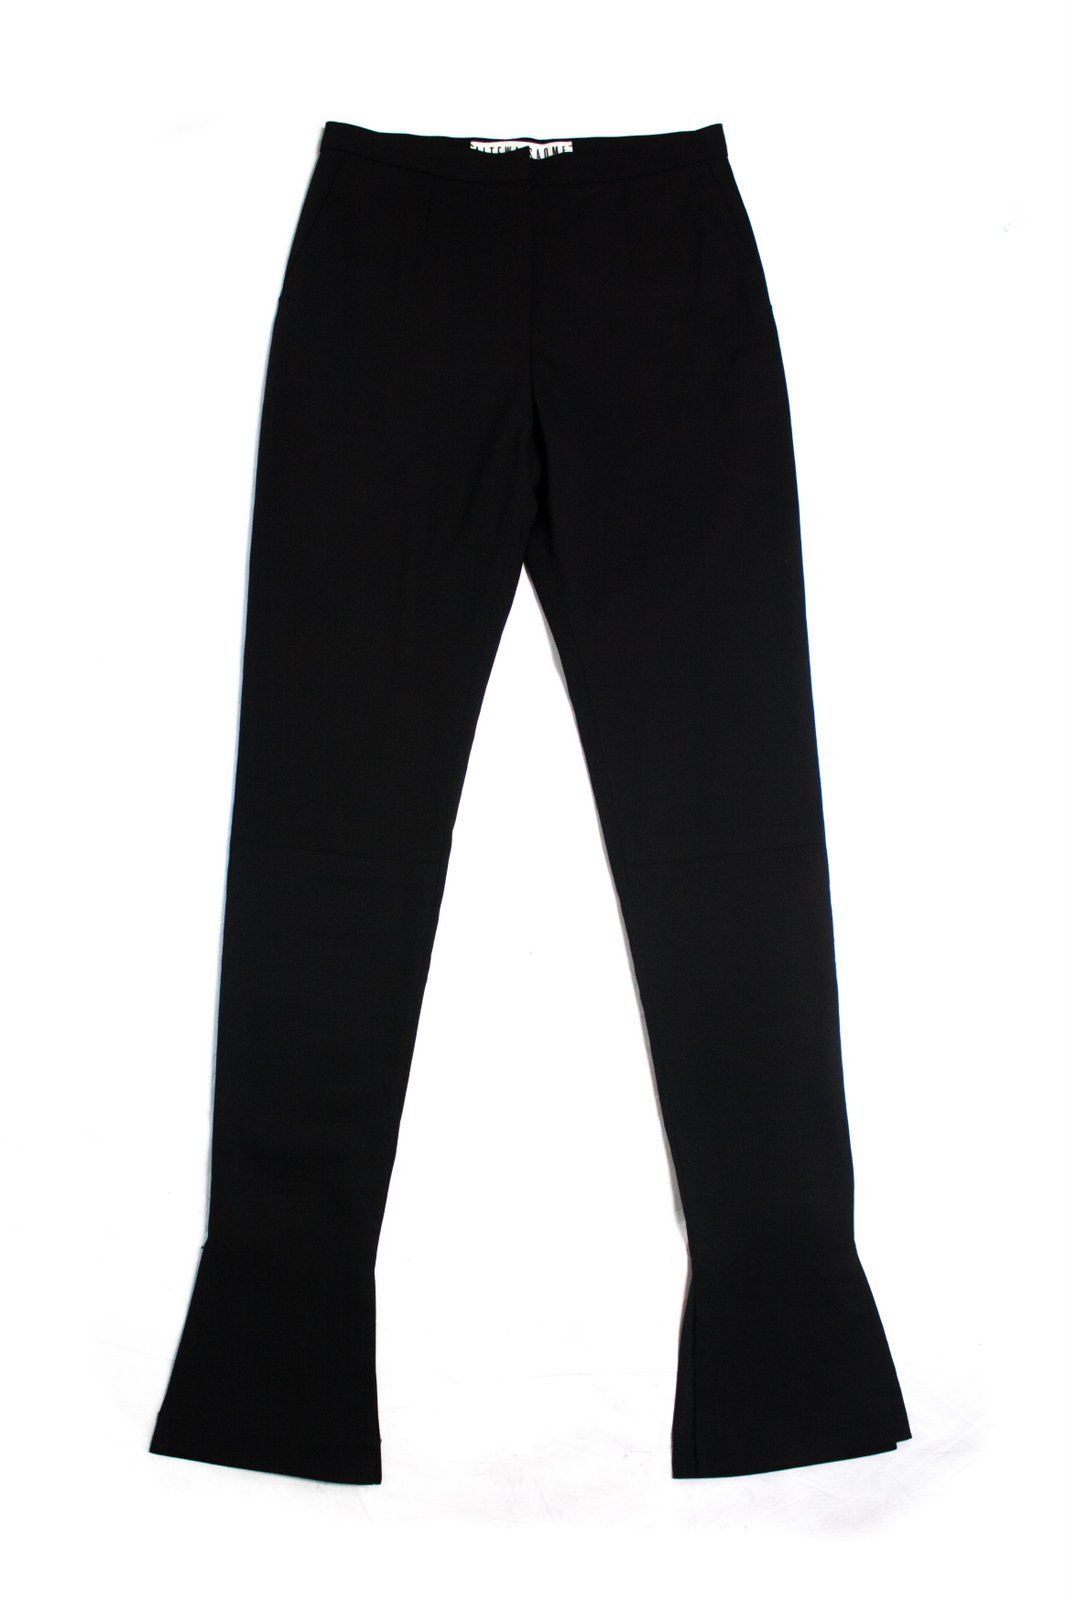 ALTEWAISAOME black pants trousers, US 10/UK 12/EU 38 - secondfirst